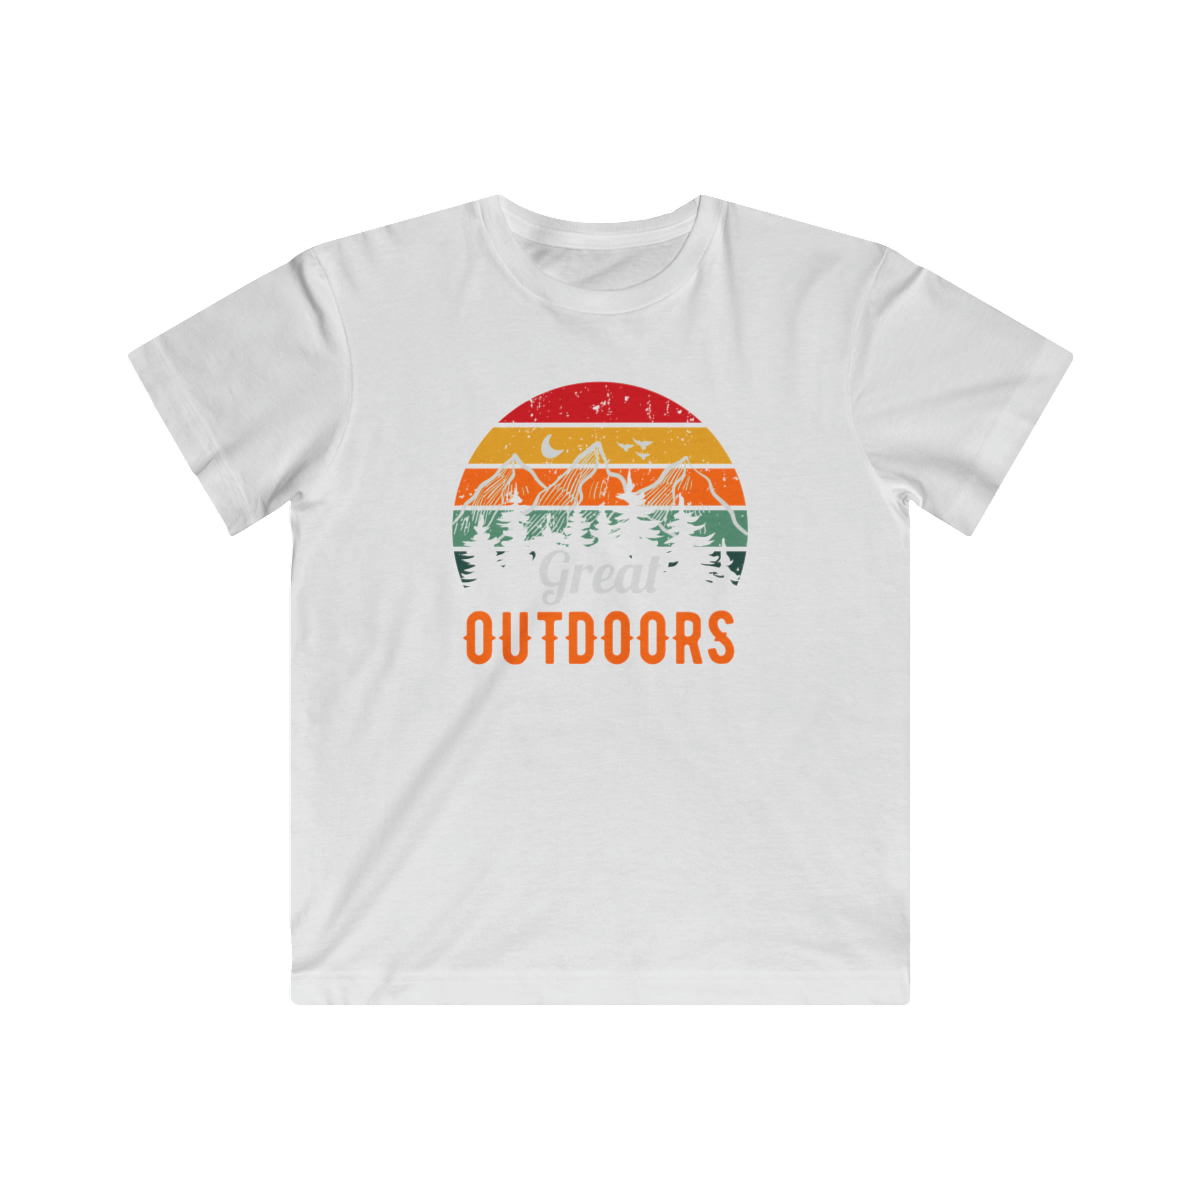 Kids Fine Jersey Tee - Retro Great Outdoors Sunset Graphic Print - $21.63